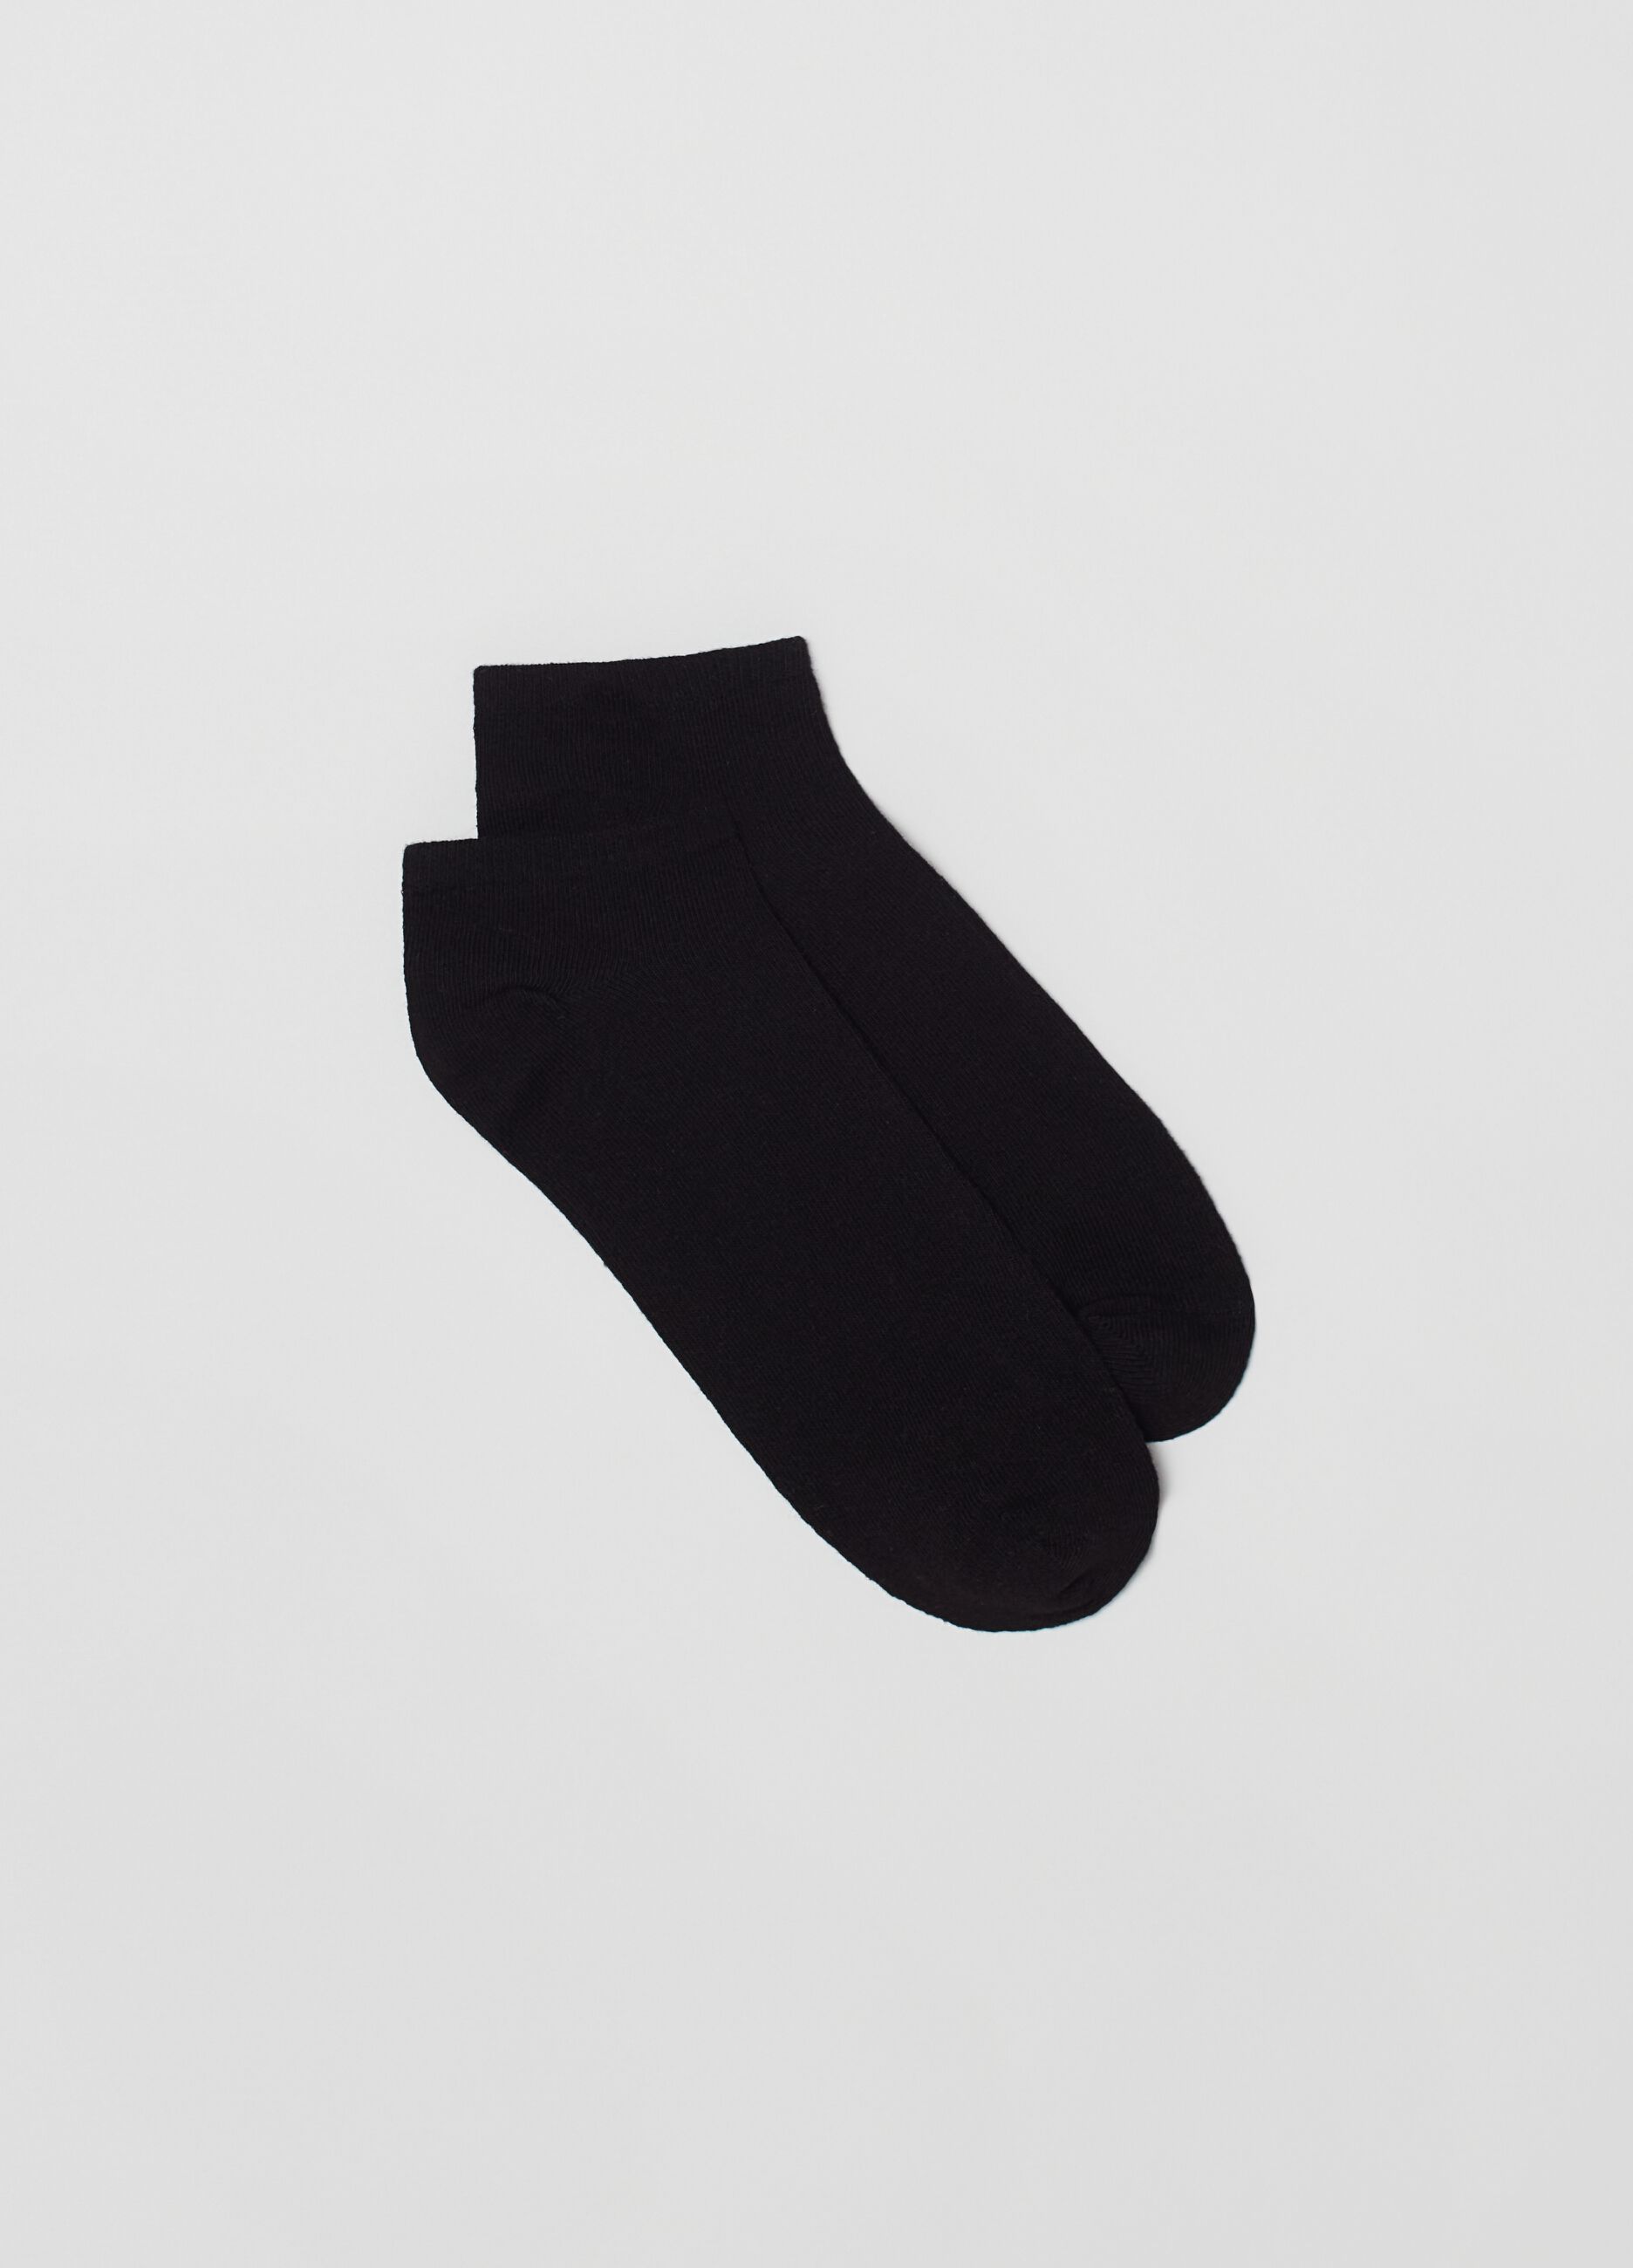 Ten-pair pack of stretch shoe liners